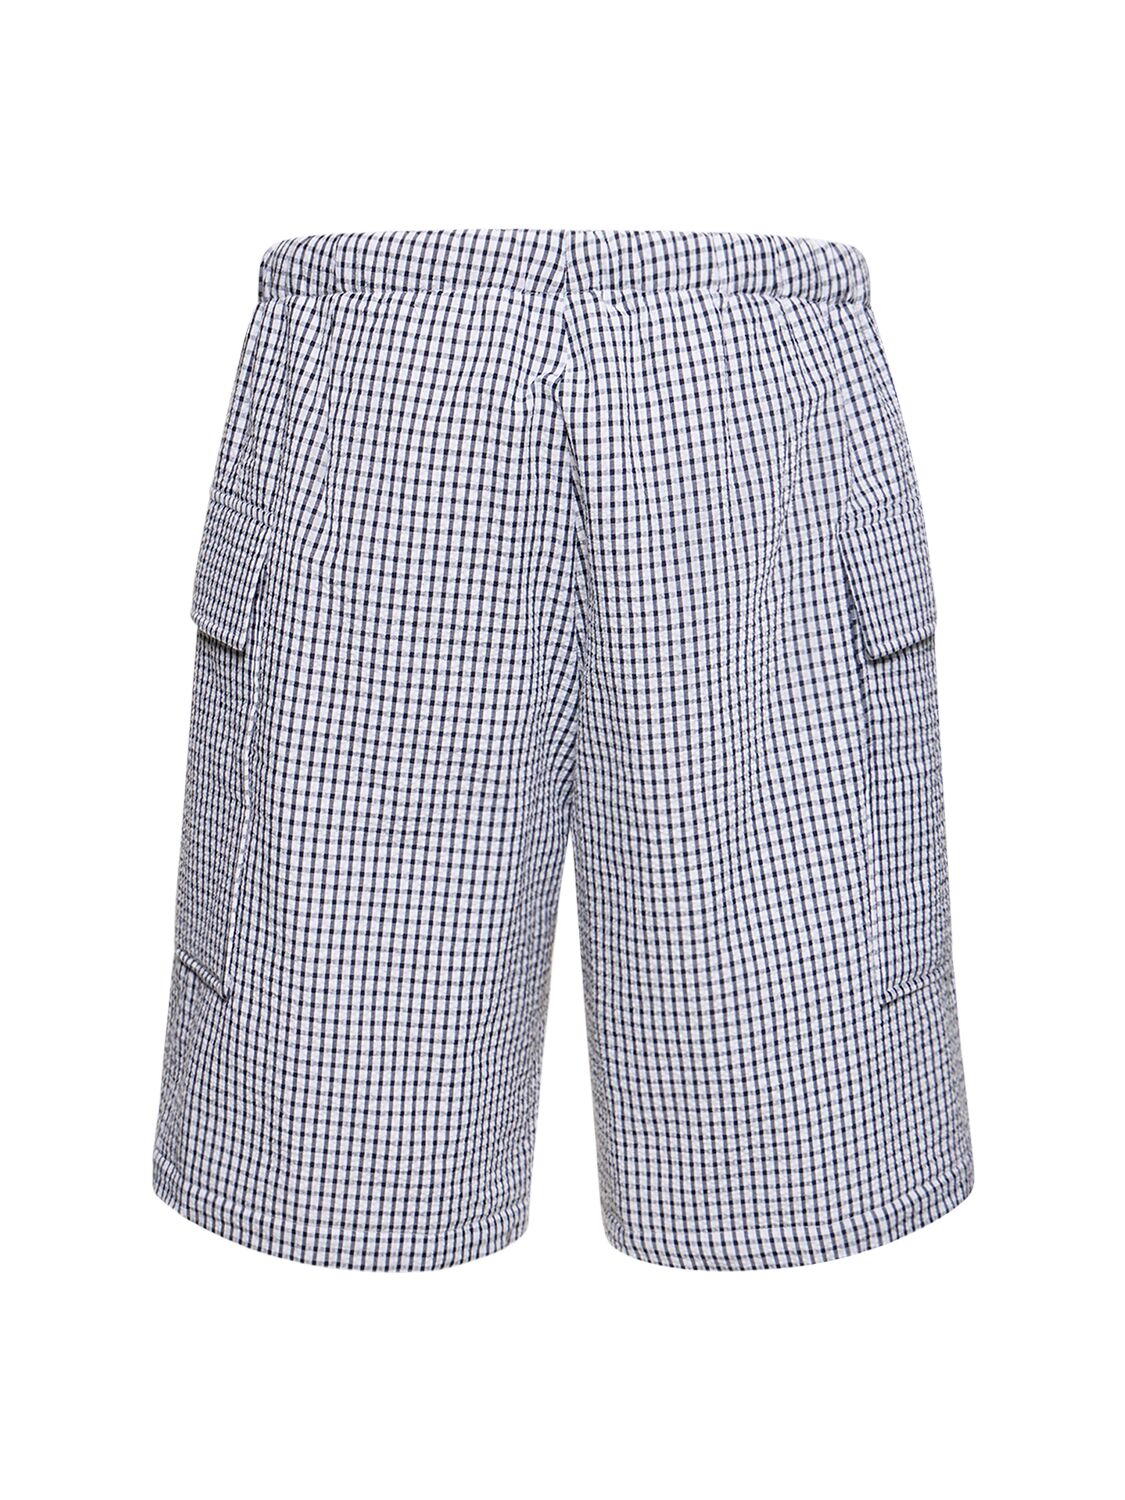 Shop After Pray Wide Check Cargo Shorts In White